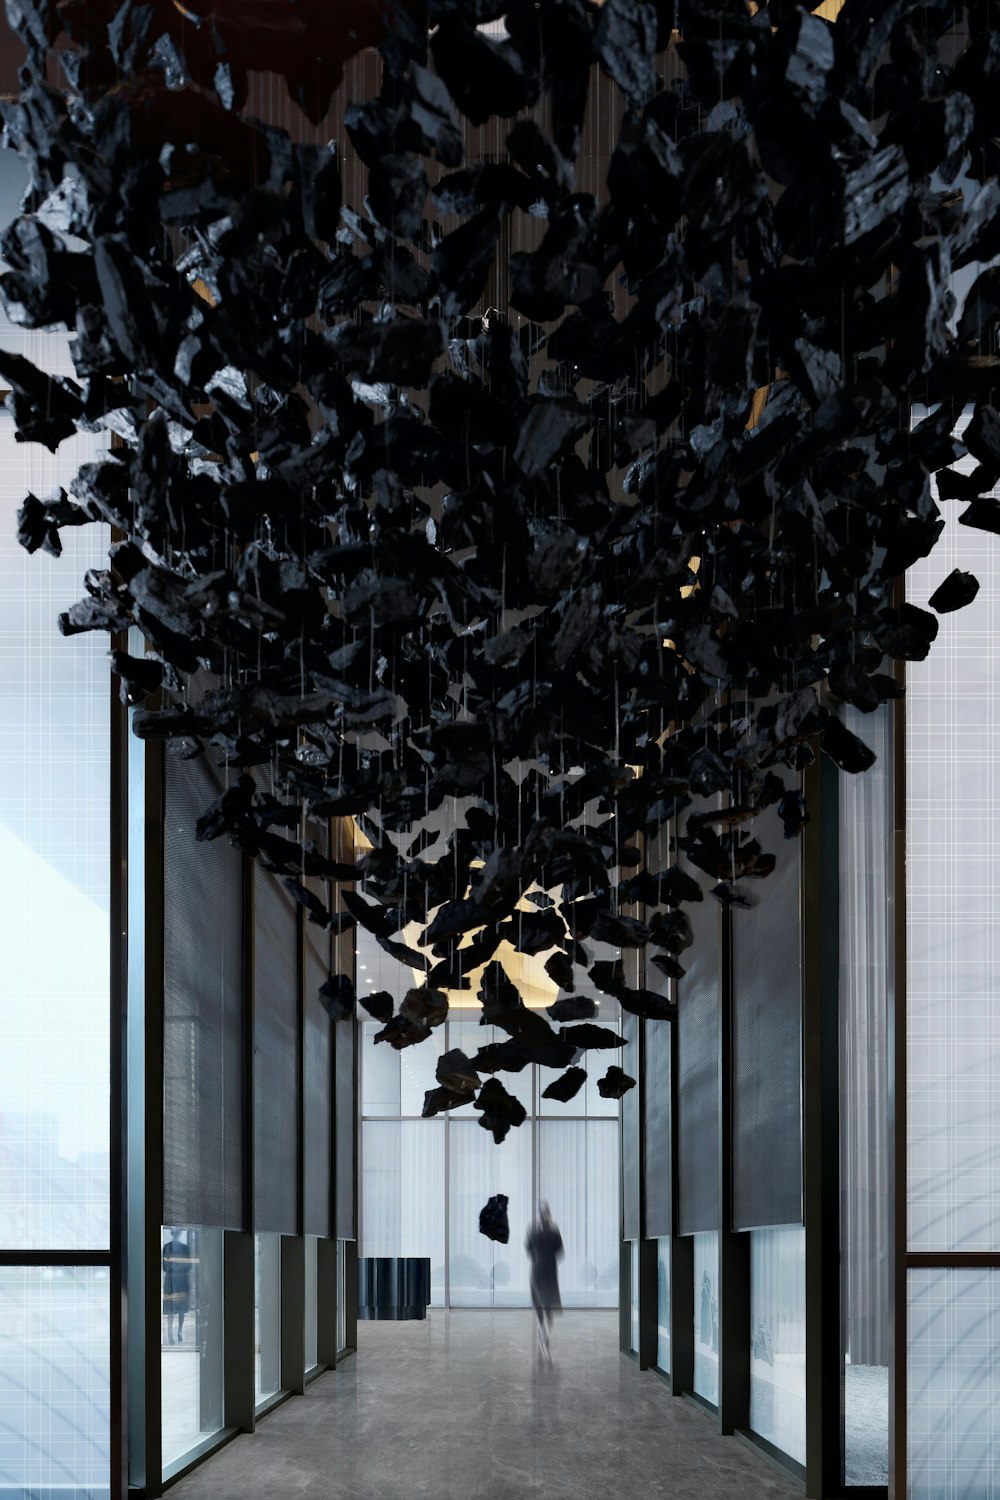 a person walking down a long hallway with lots of black objects hanging from the ceiling